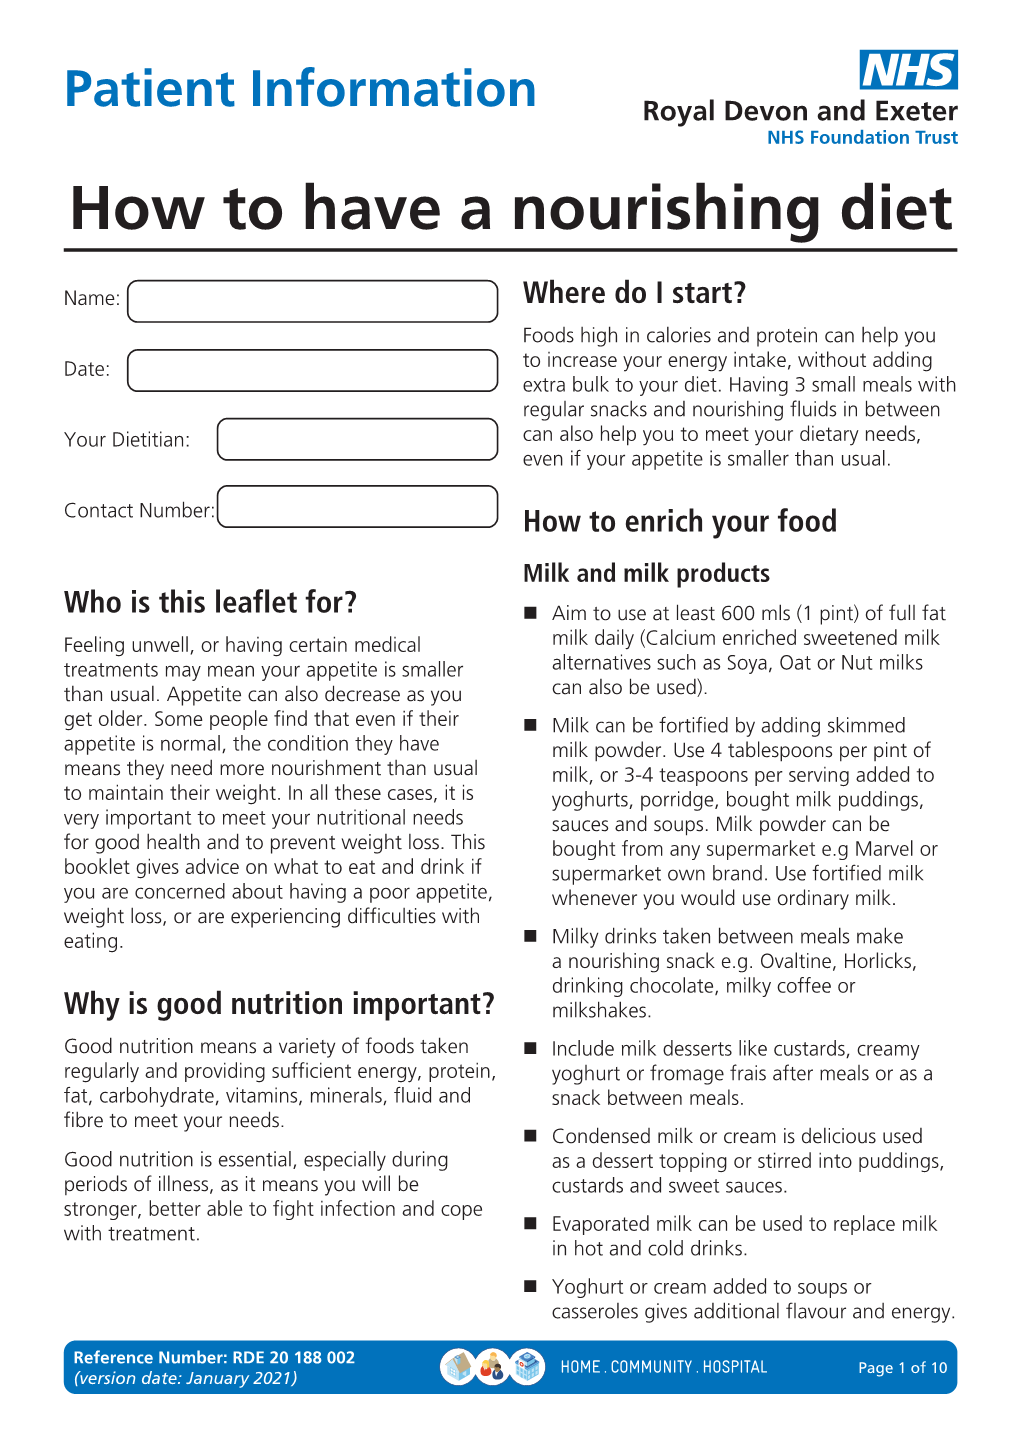 How to Have a Nourishing Diet (RDE 20 188 002)